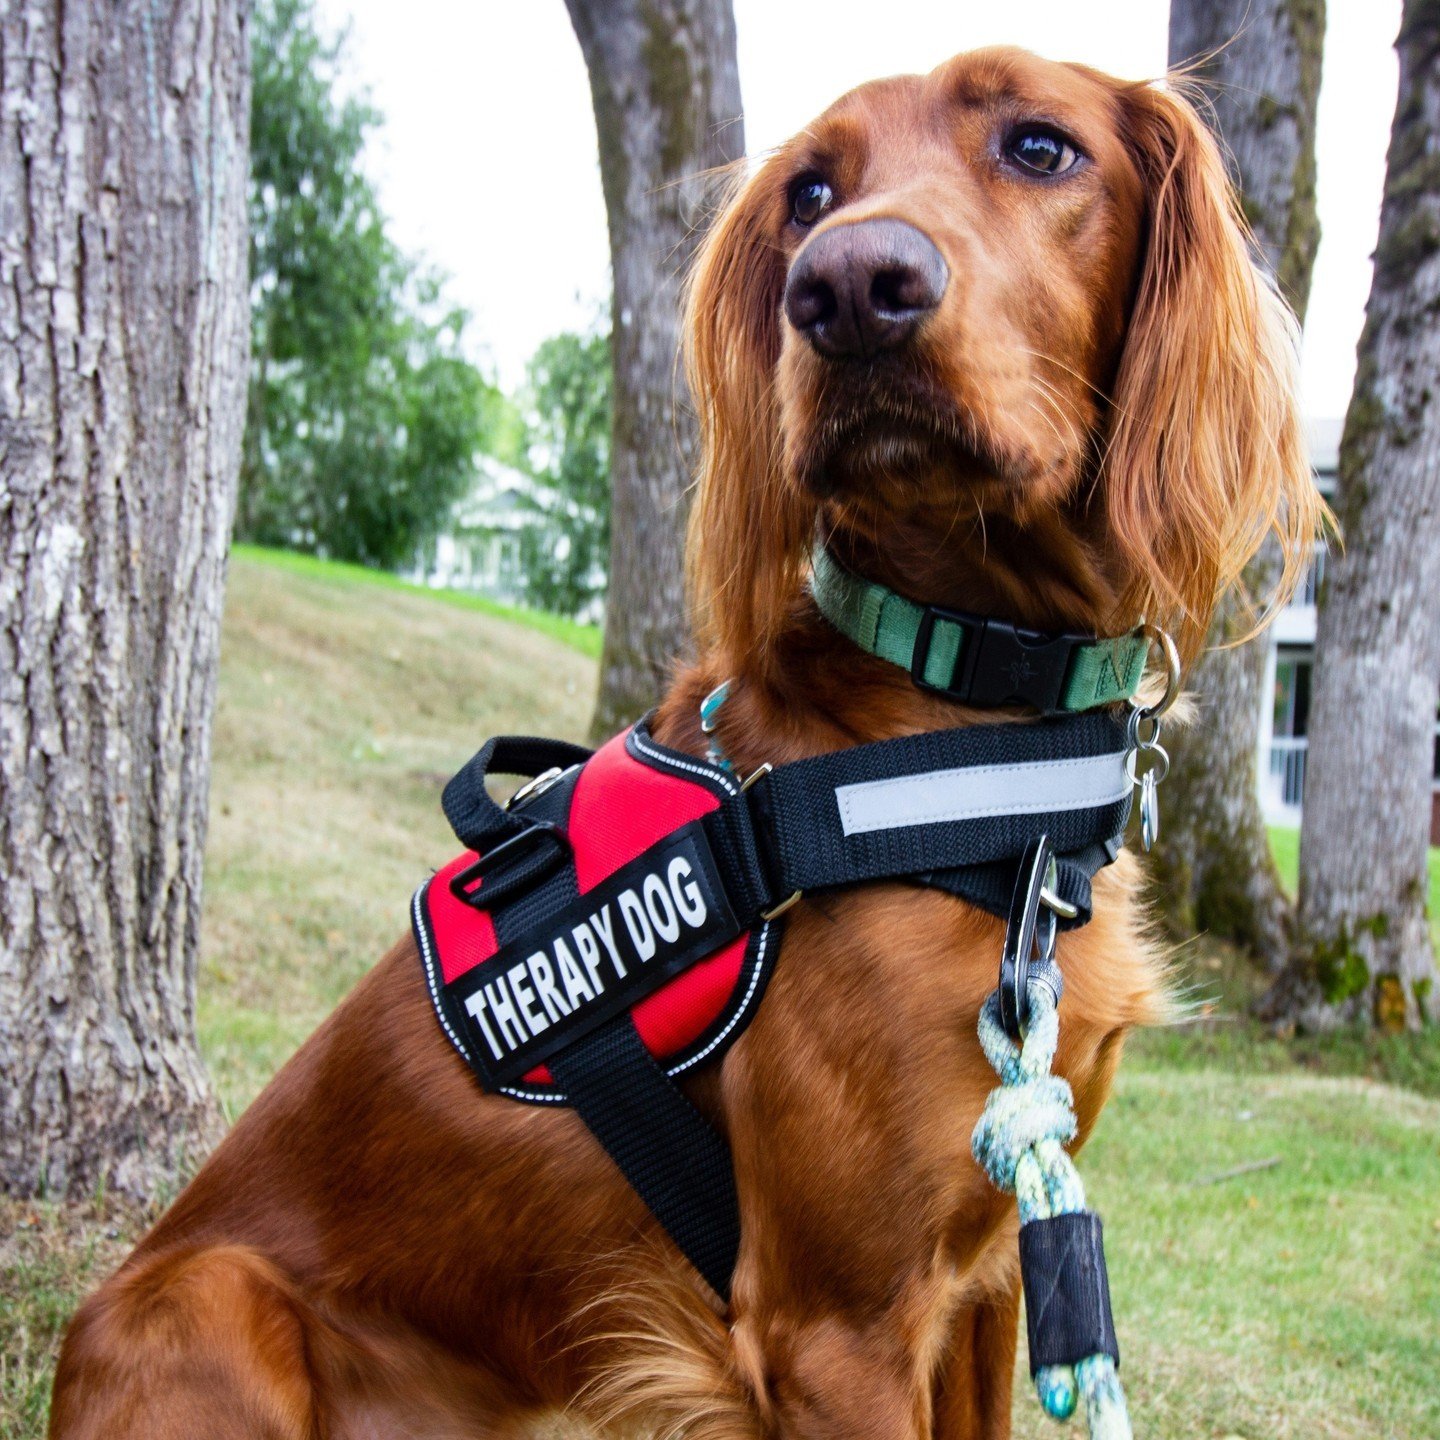 Happy #NationalKidsAndPetsDay! Do you know the difference between Service Dogs, Emotional Support Dogs, and Therapy Dogs? Learn more about them (and other types of amazing support animals) in our Qi Blog: QiCreative.com/blog/assistance-dogs 🐶🐕🐈

#